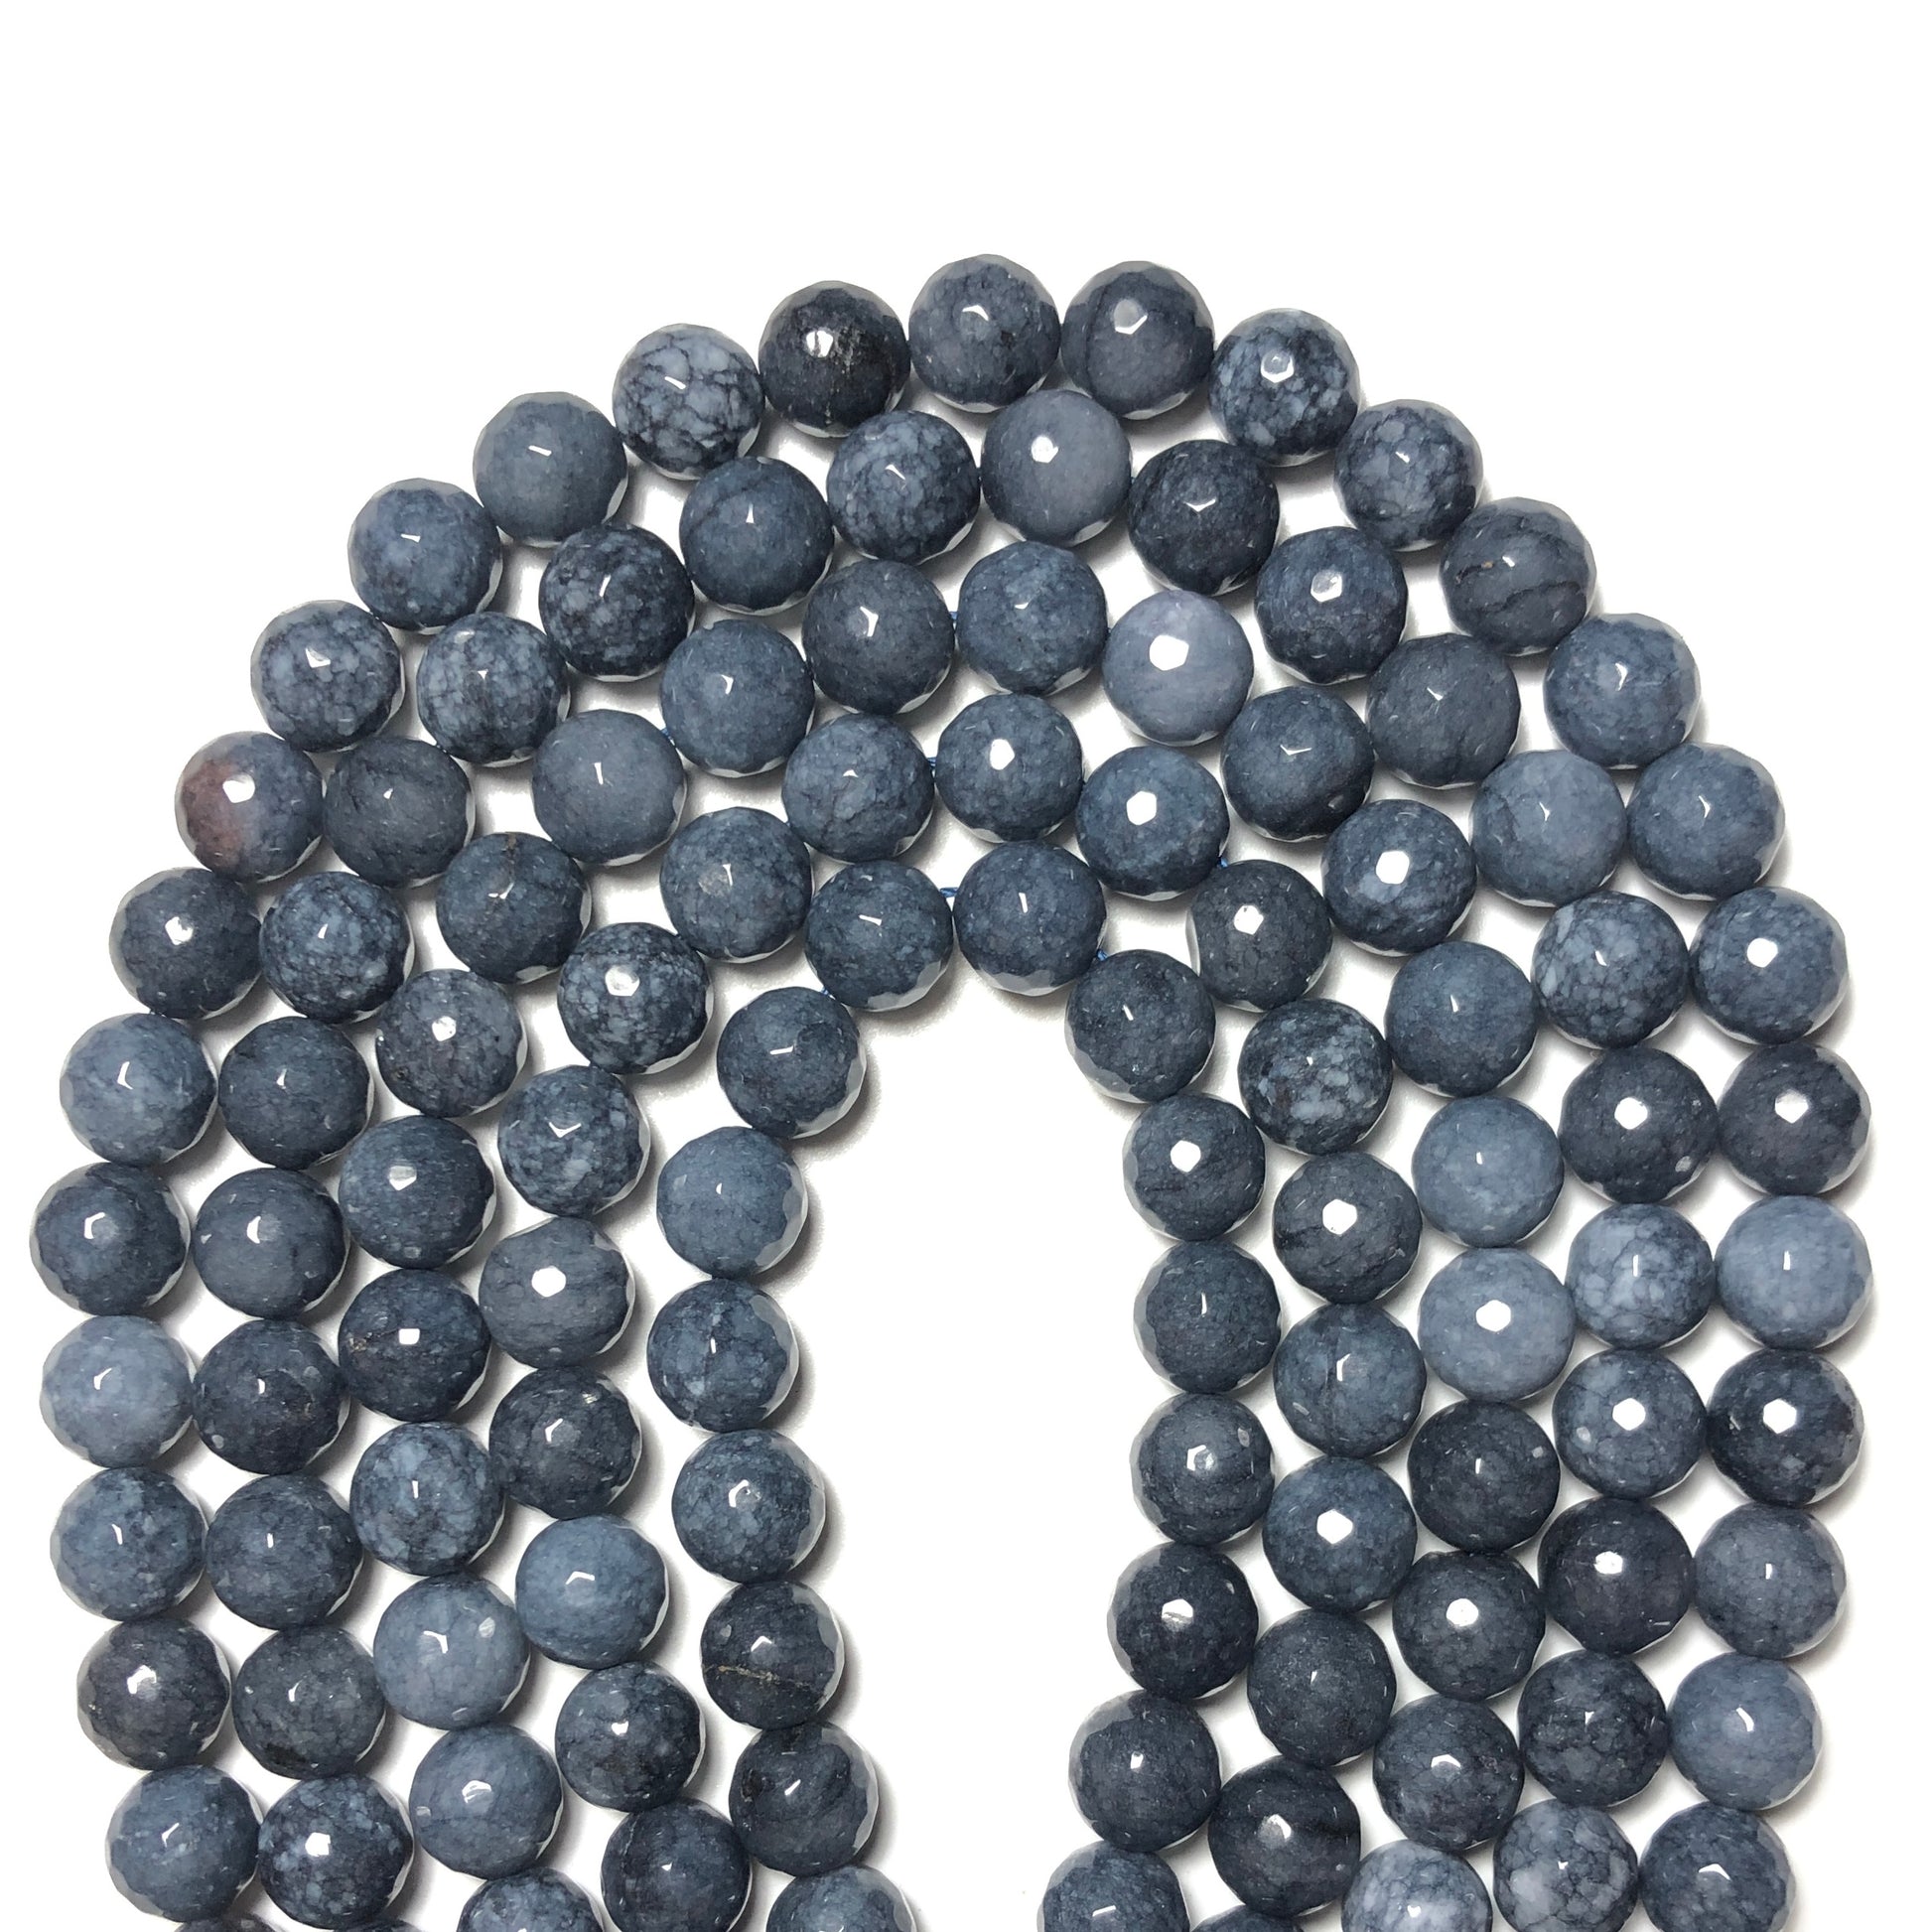 2 Strands/lot 10mm Dark Gray Faceted Jade Stone Beads Stone Beads Faceted Jade Beads New Beads Arrivals Charms Beads Beyond